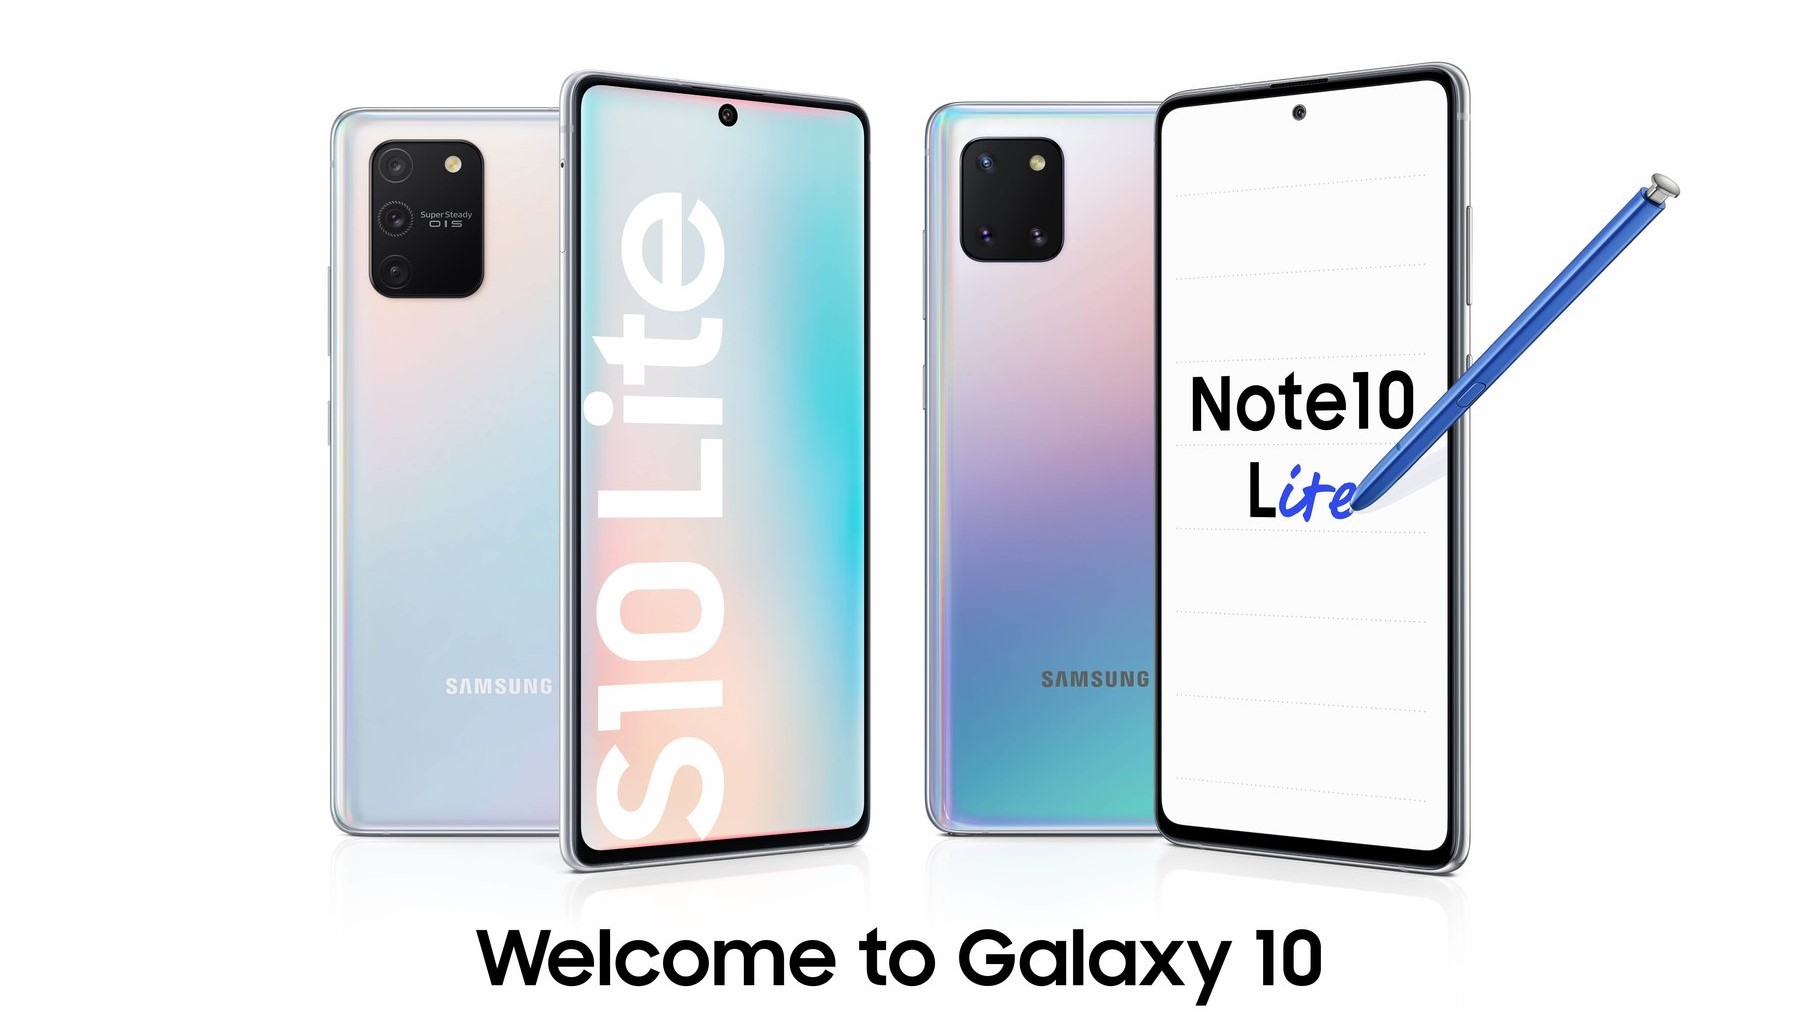 Galaxy S10 Lite and Note 10 Lite are made official by Samsung; see prices